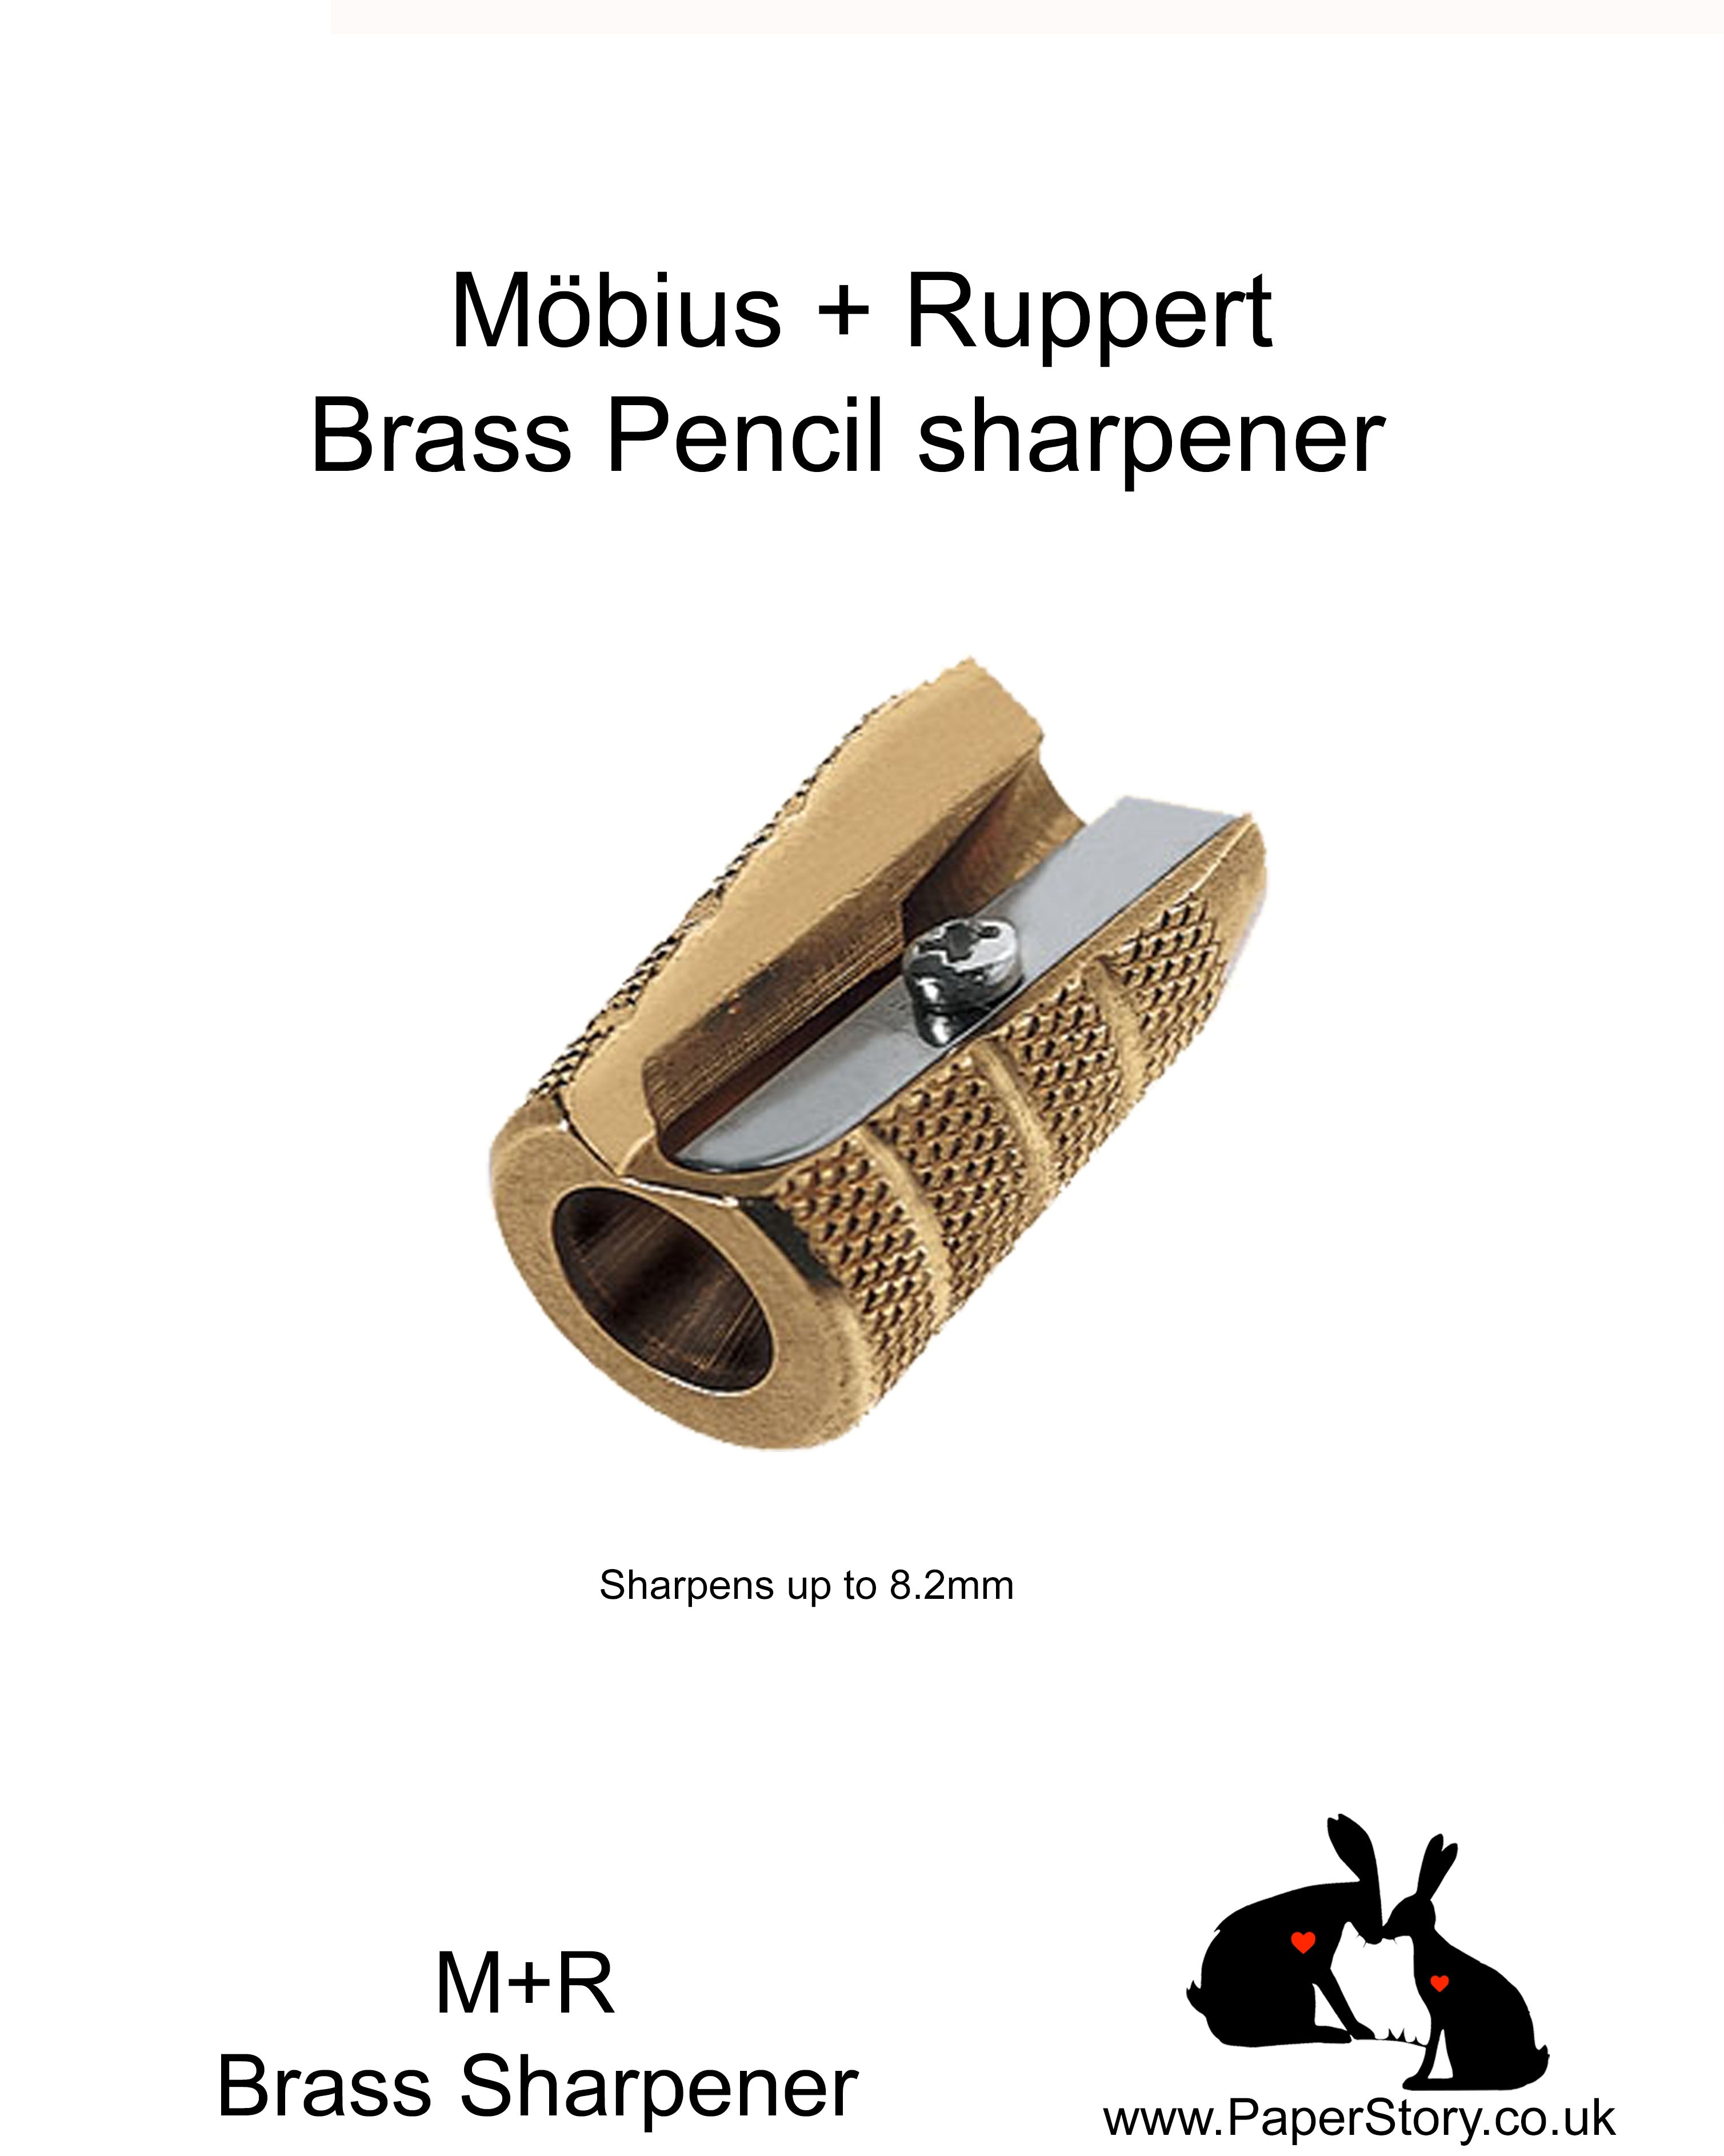 M+R Brass round pencil sharpener barrel GRANITE, Grenade style, Looks and feel of  quality. These heavy hand held quality sharpener made by Möbius + Ruppert in Germany These unbreakable sharpeners, are suited for pencils up to 8.2 mm  hardened M+R quality blades